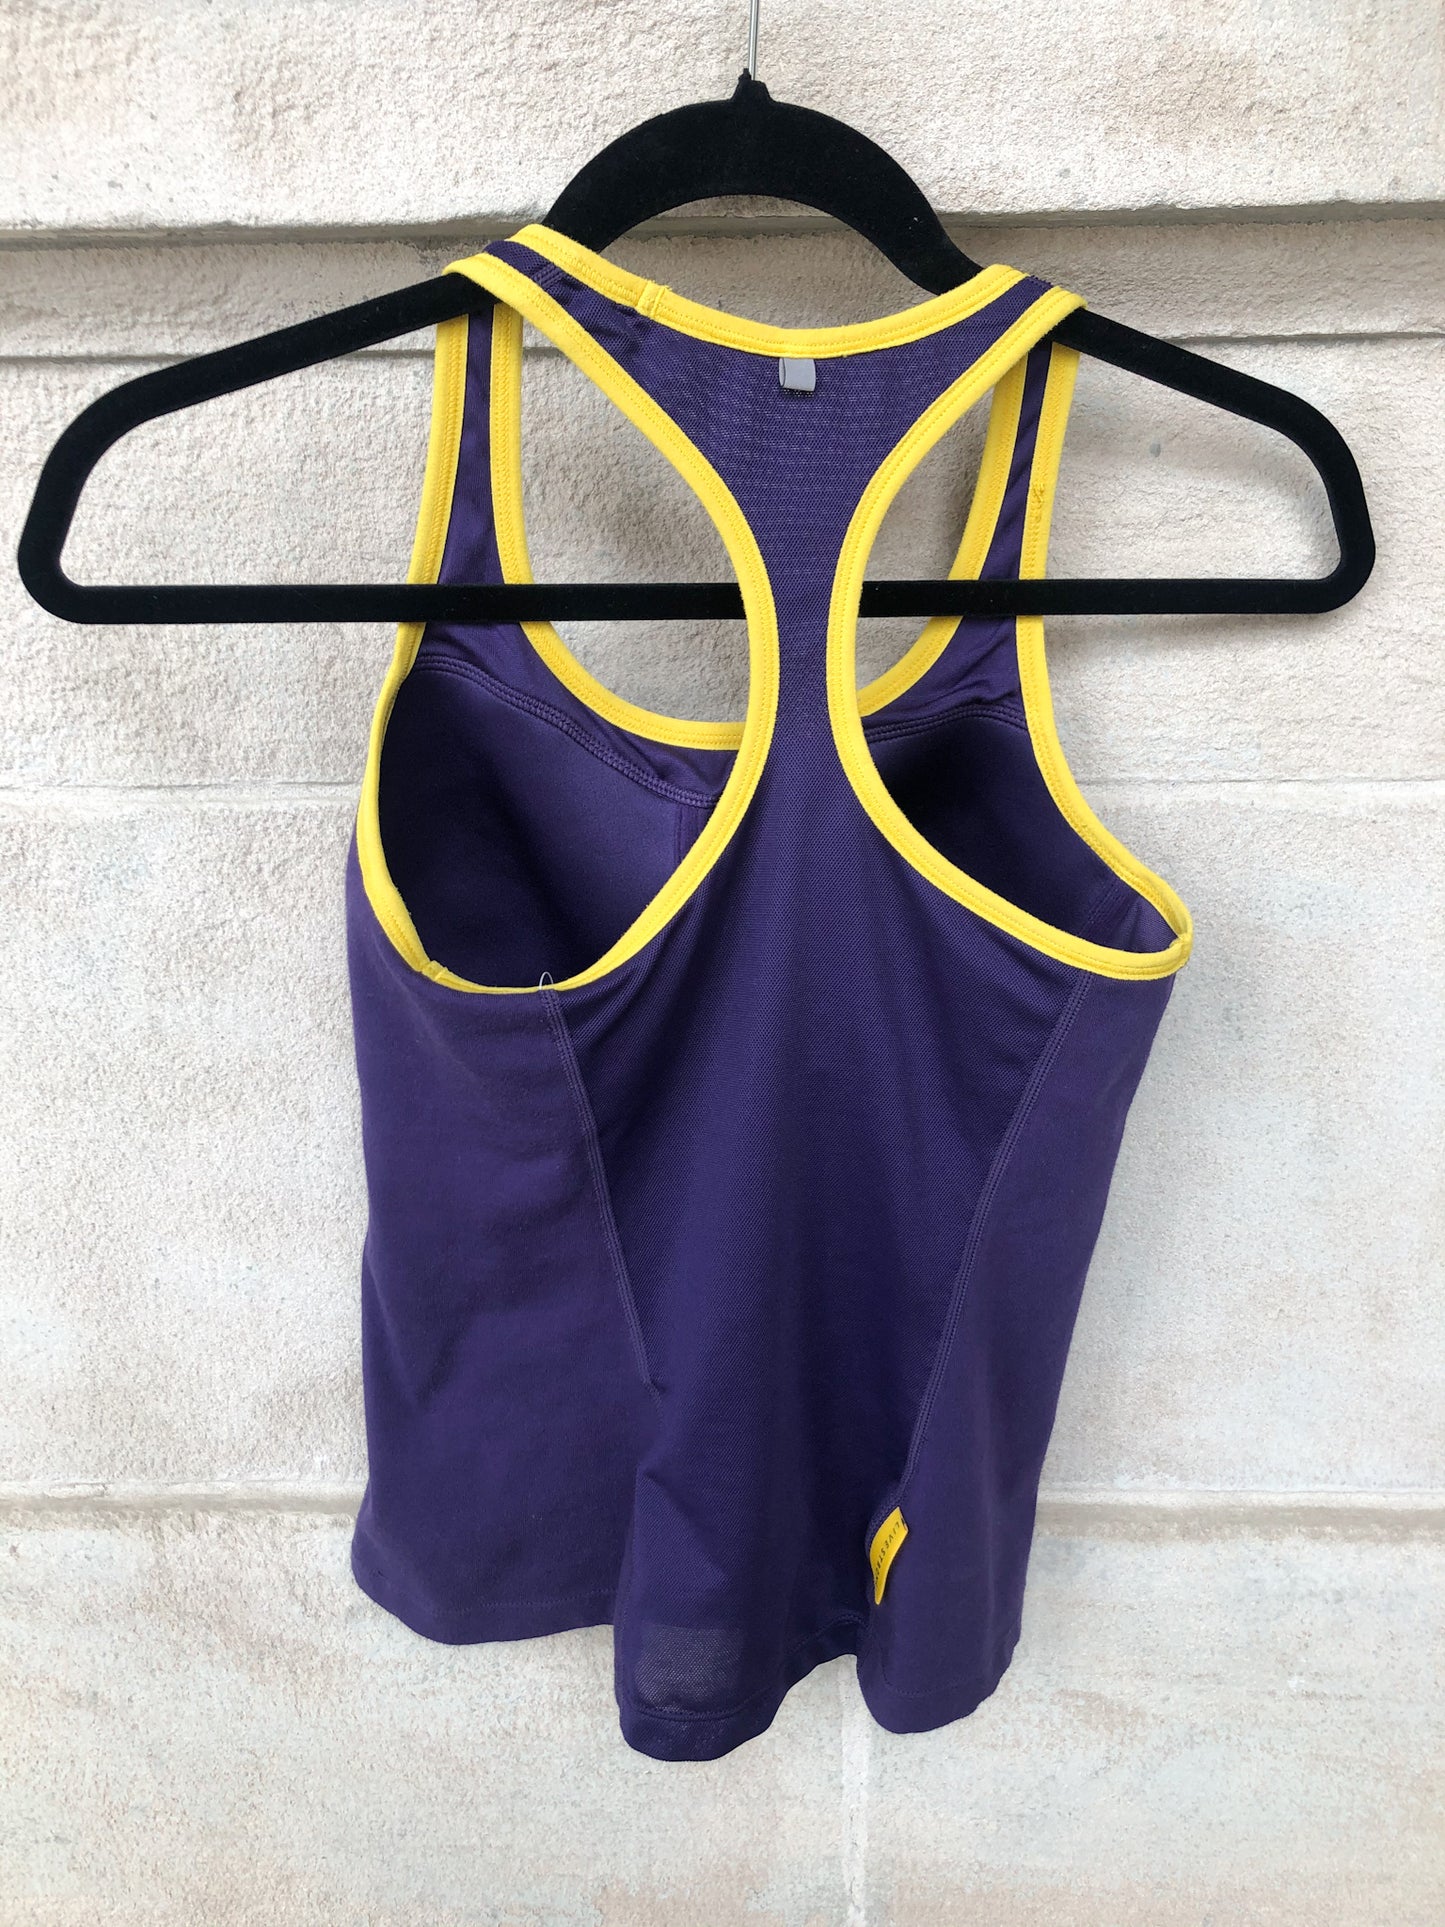 Nike Purple Livestrong Workout Top with Built in Bra - Small